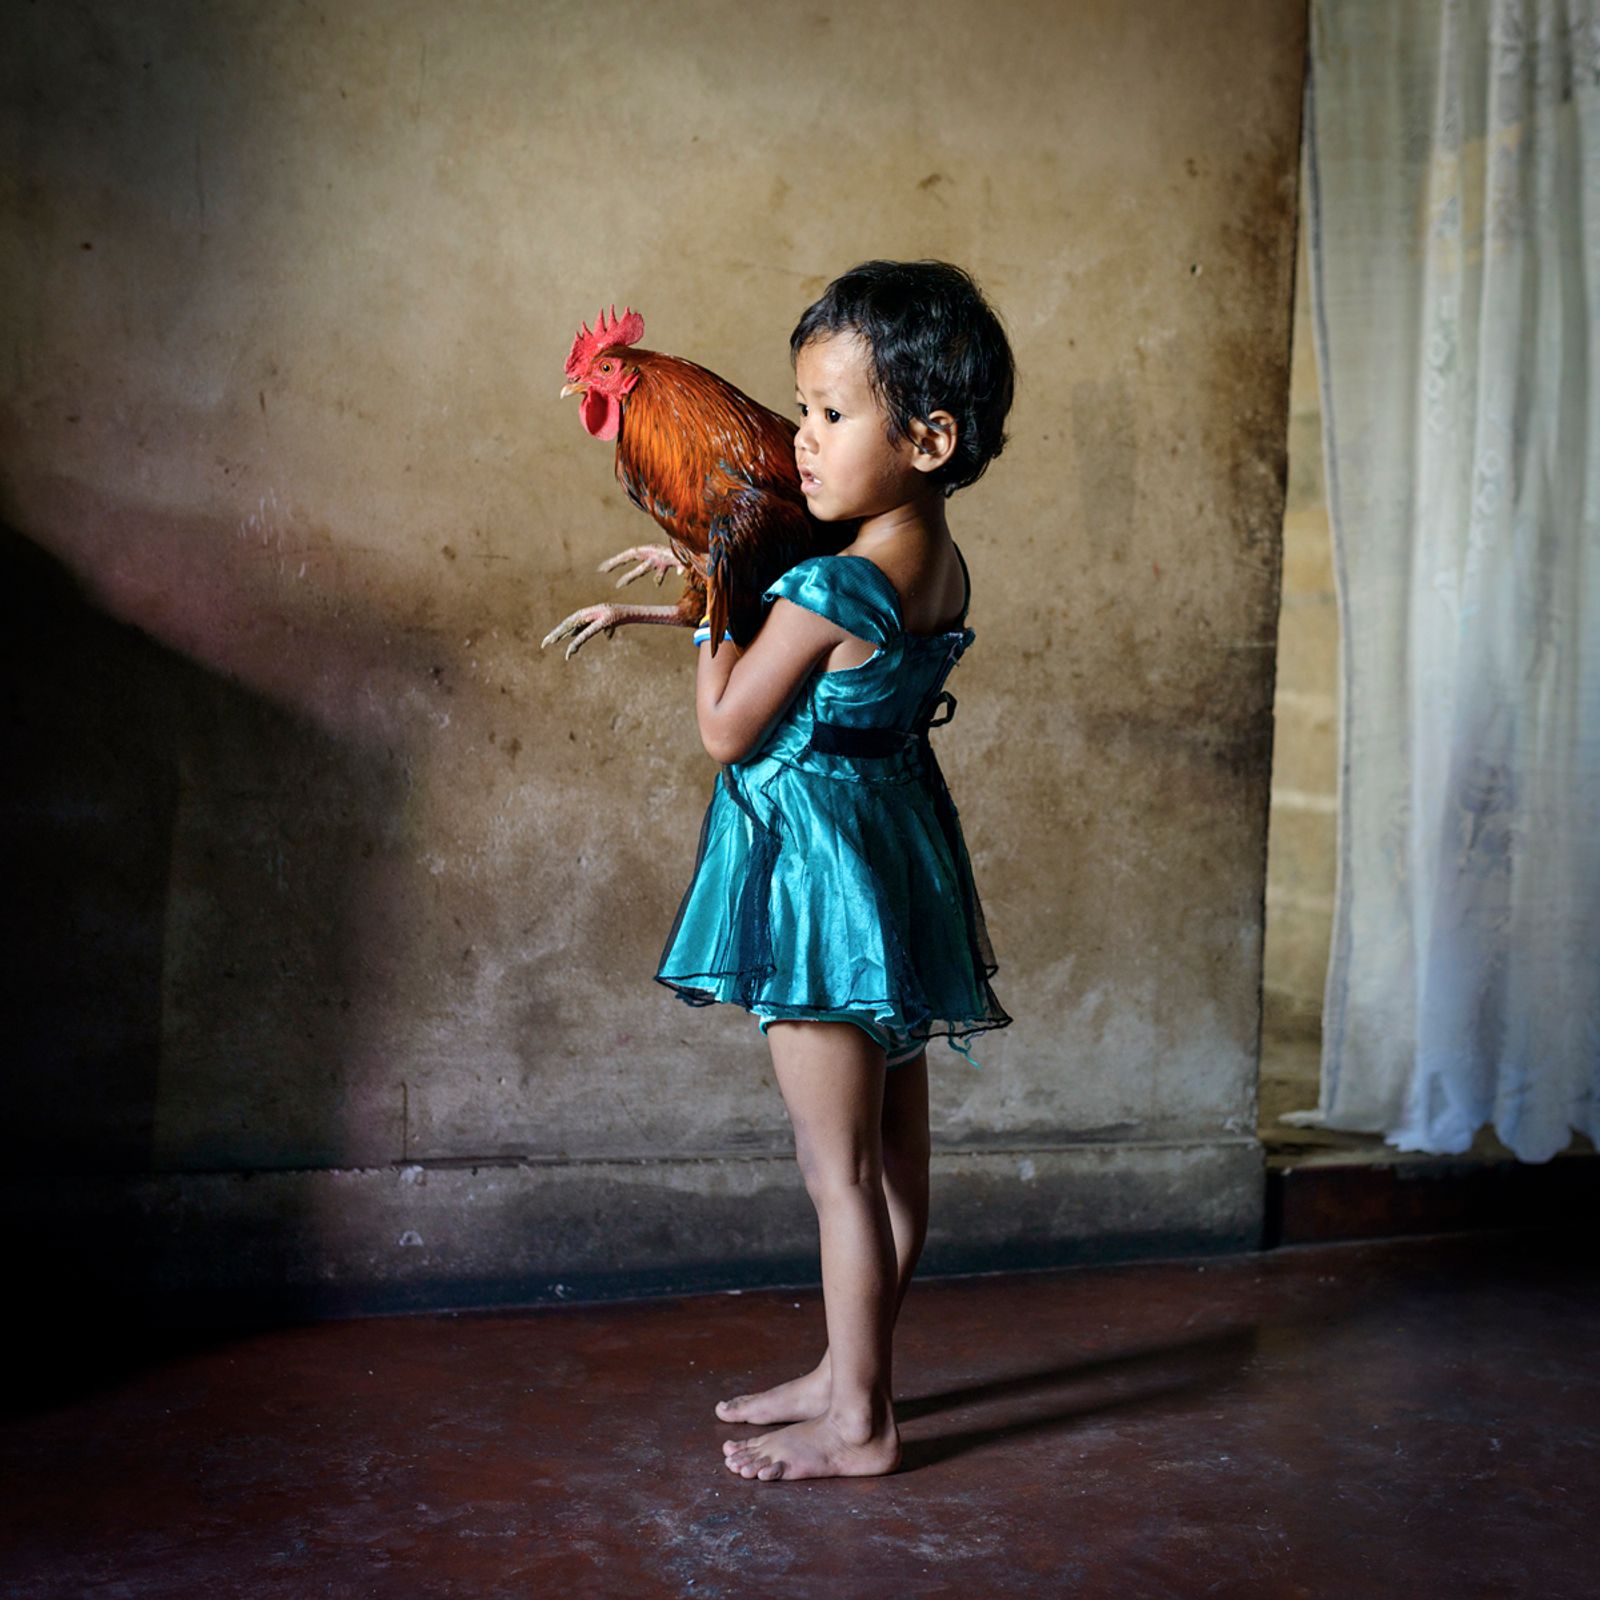 © Karolin Klüppel - Yasmin holds a rooster. She loves to catch and play with it after dawn.